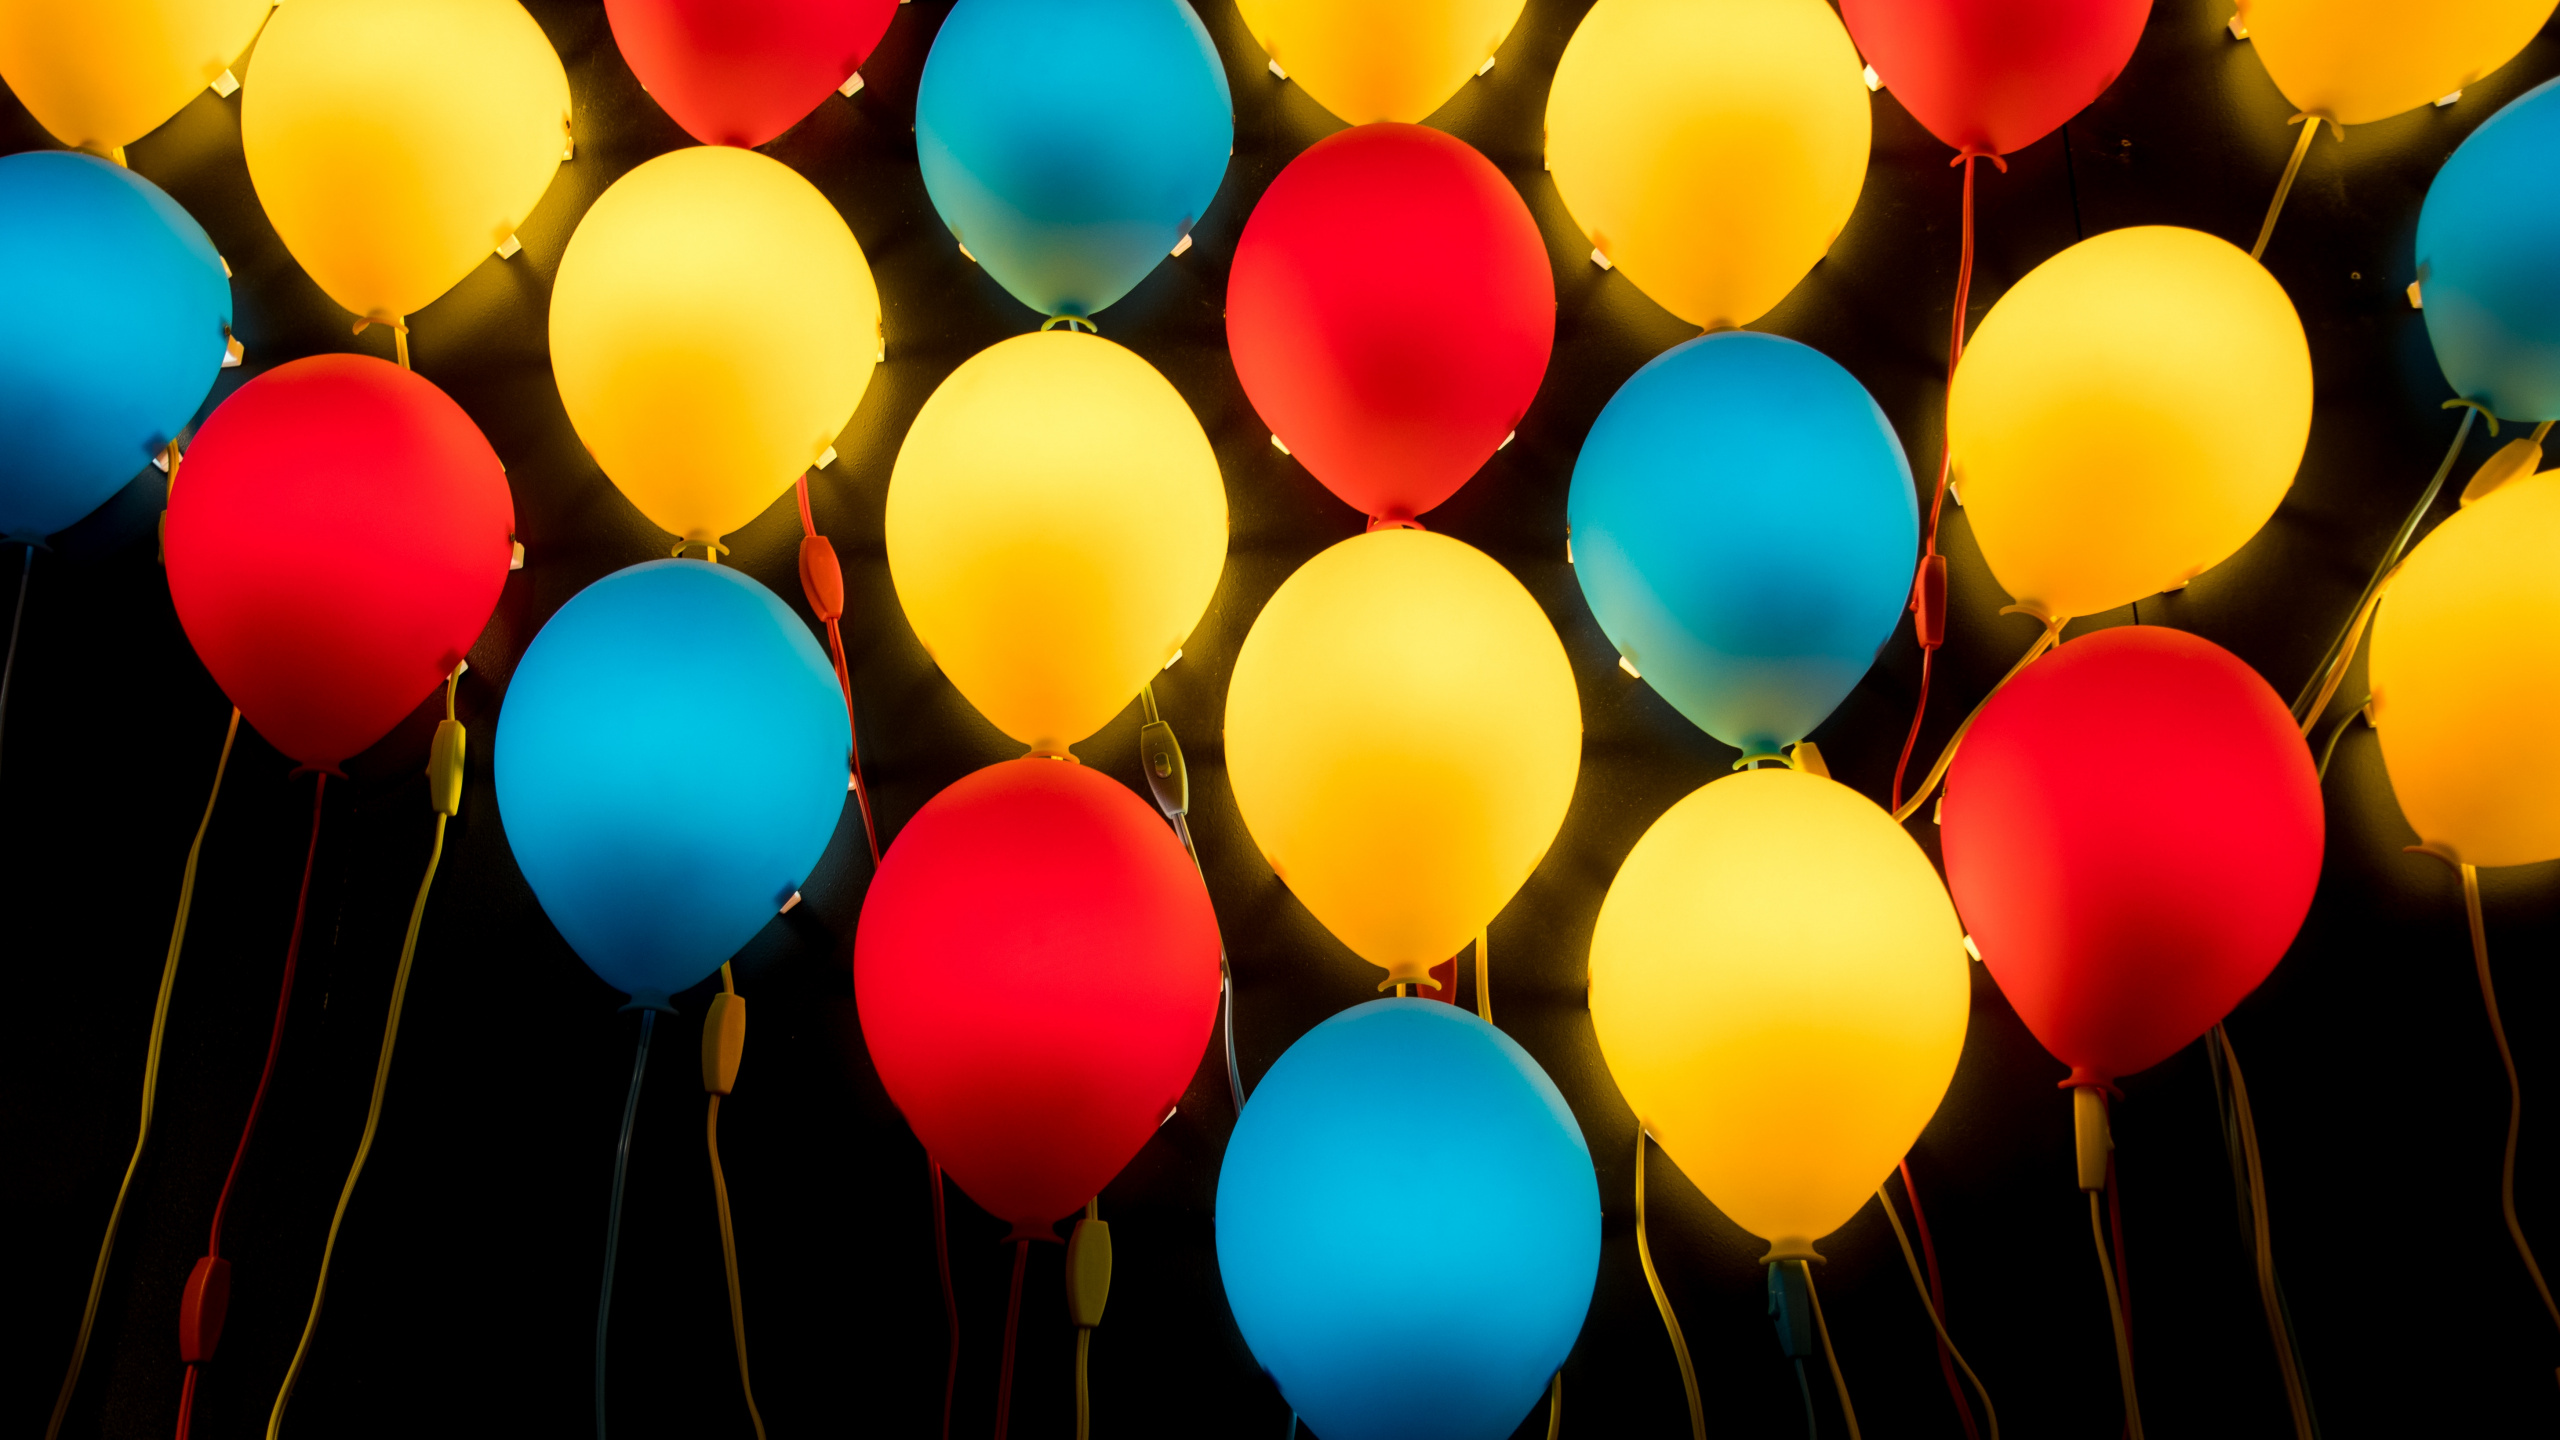 Yellow Blue and Red Balloons. Wallpaper in 2560x1440 Resolution